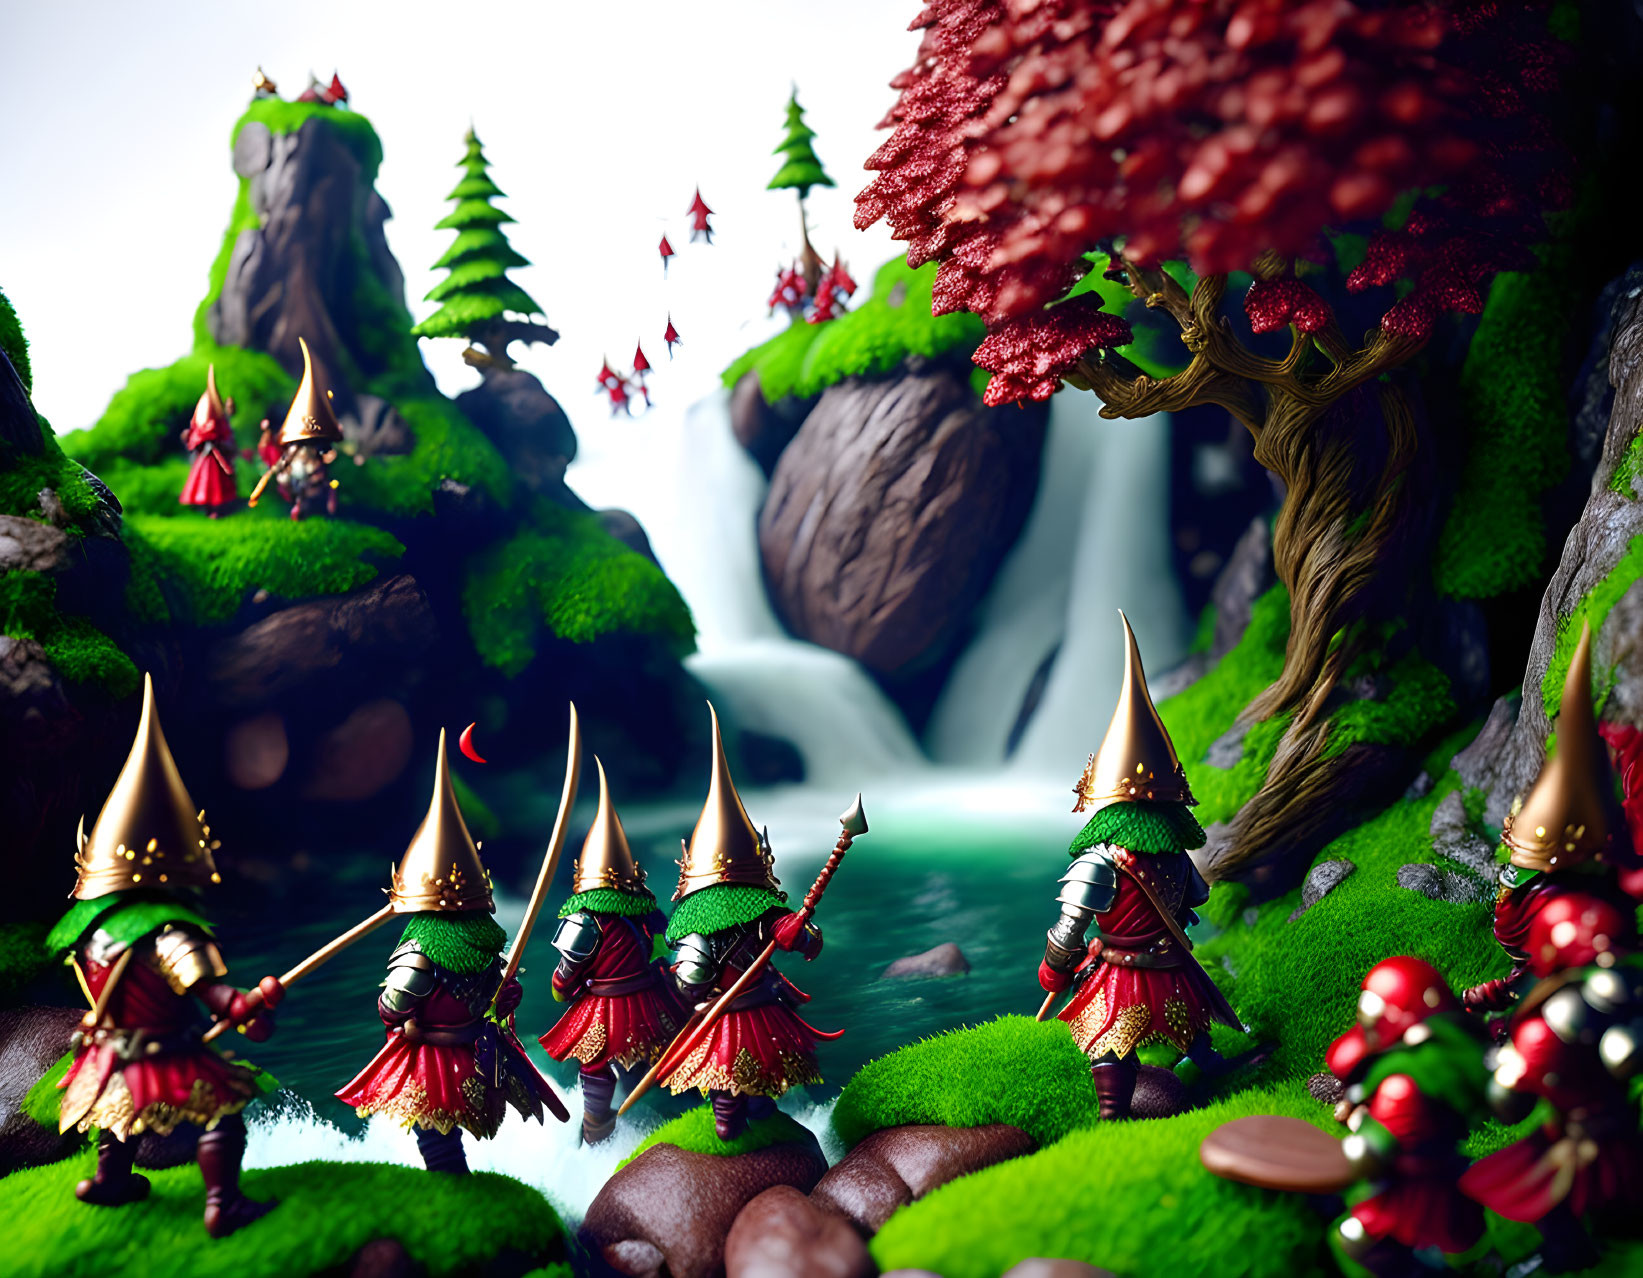 Fantasy landscape with waterfall, moss-covered rocks, red-leafed trees, and miniature armored knights